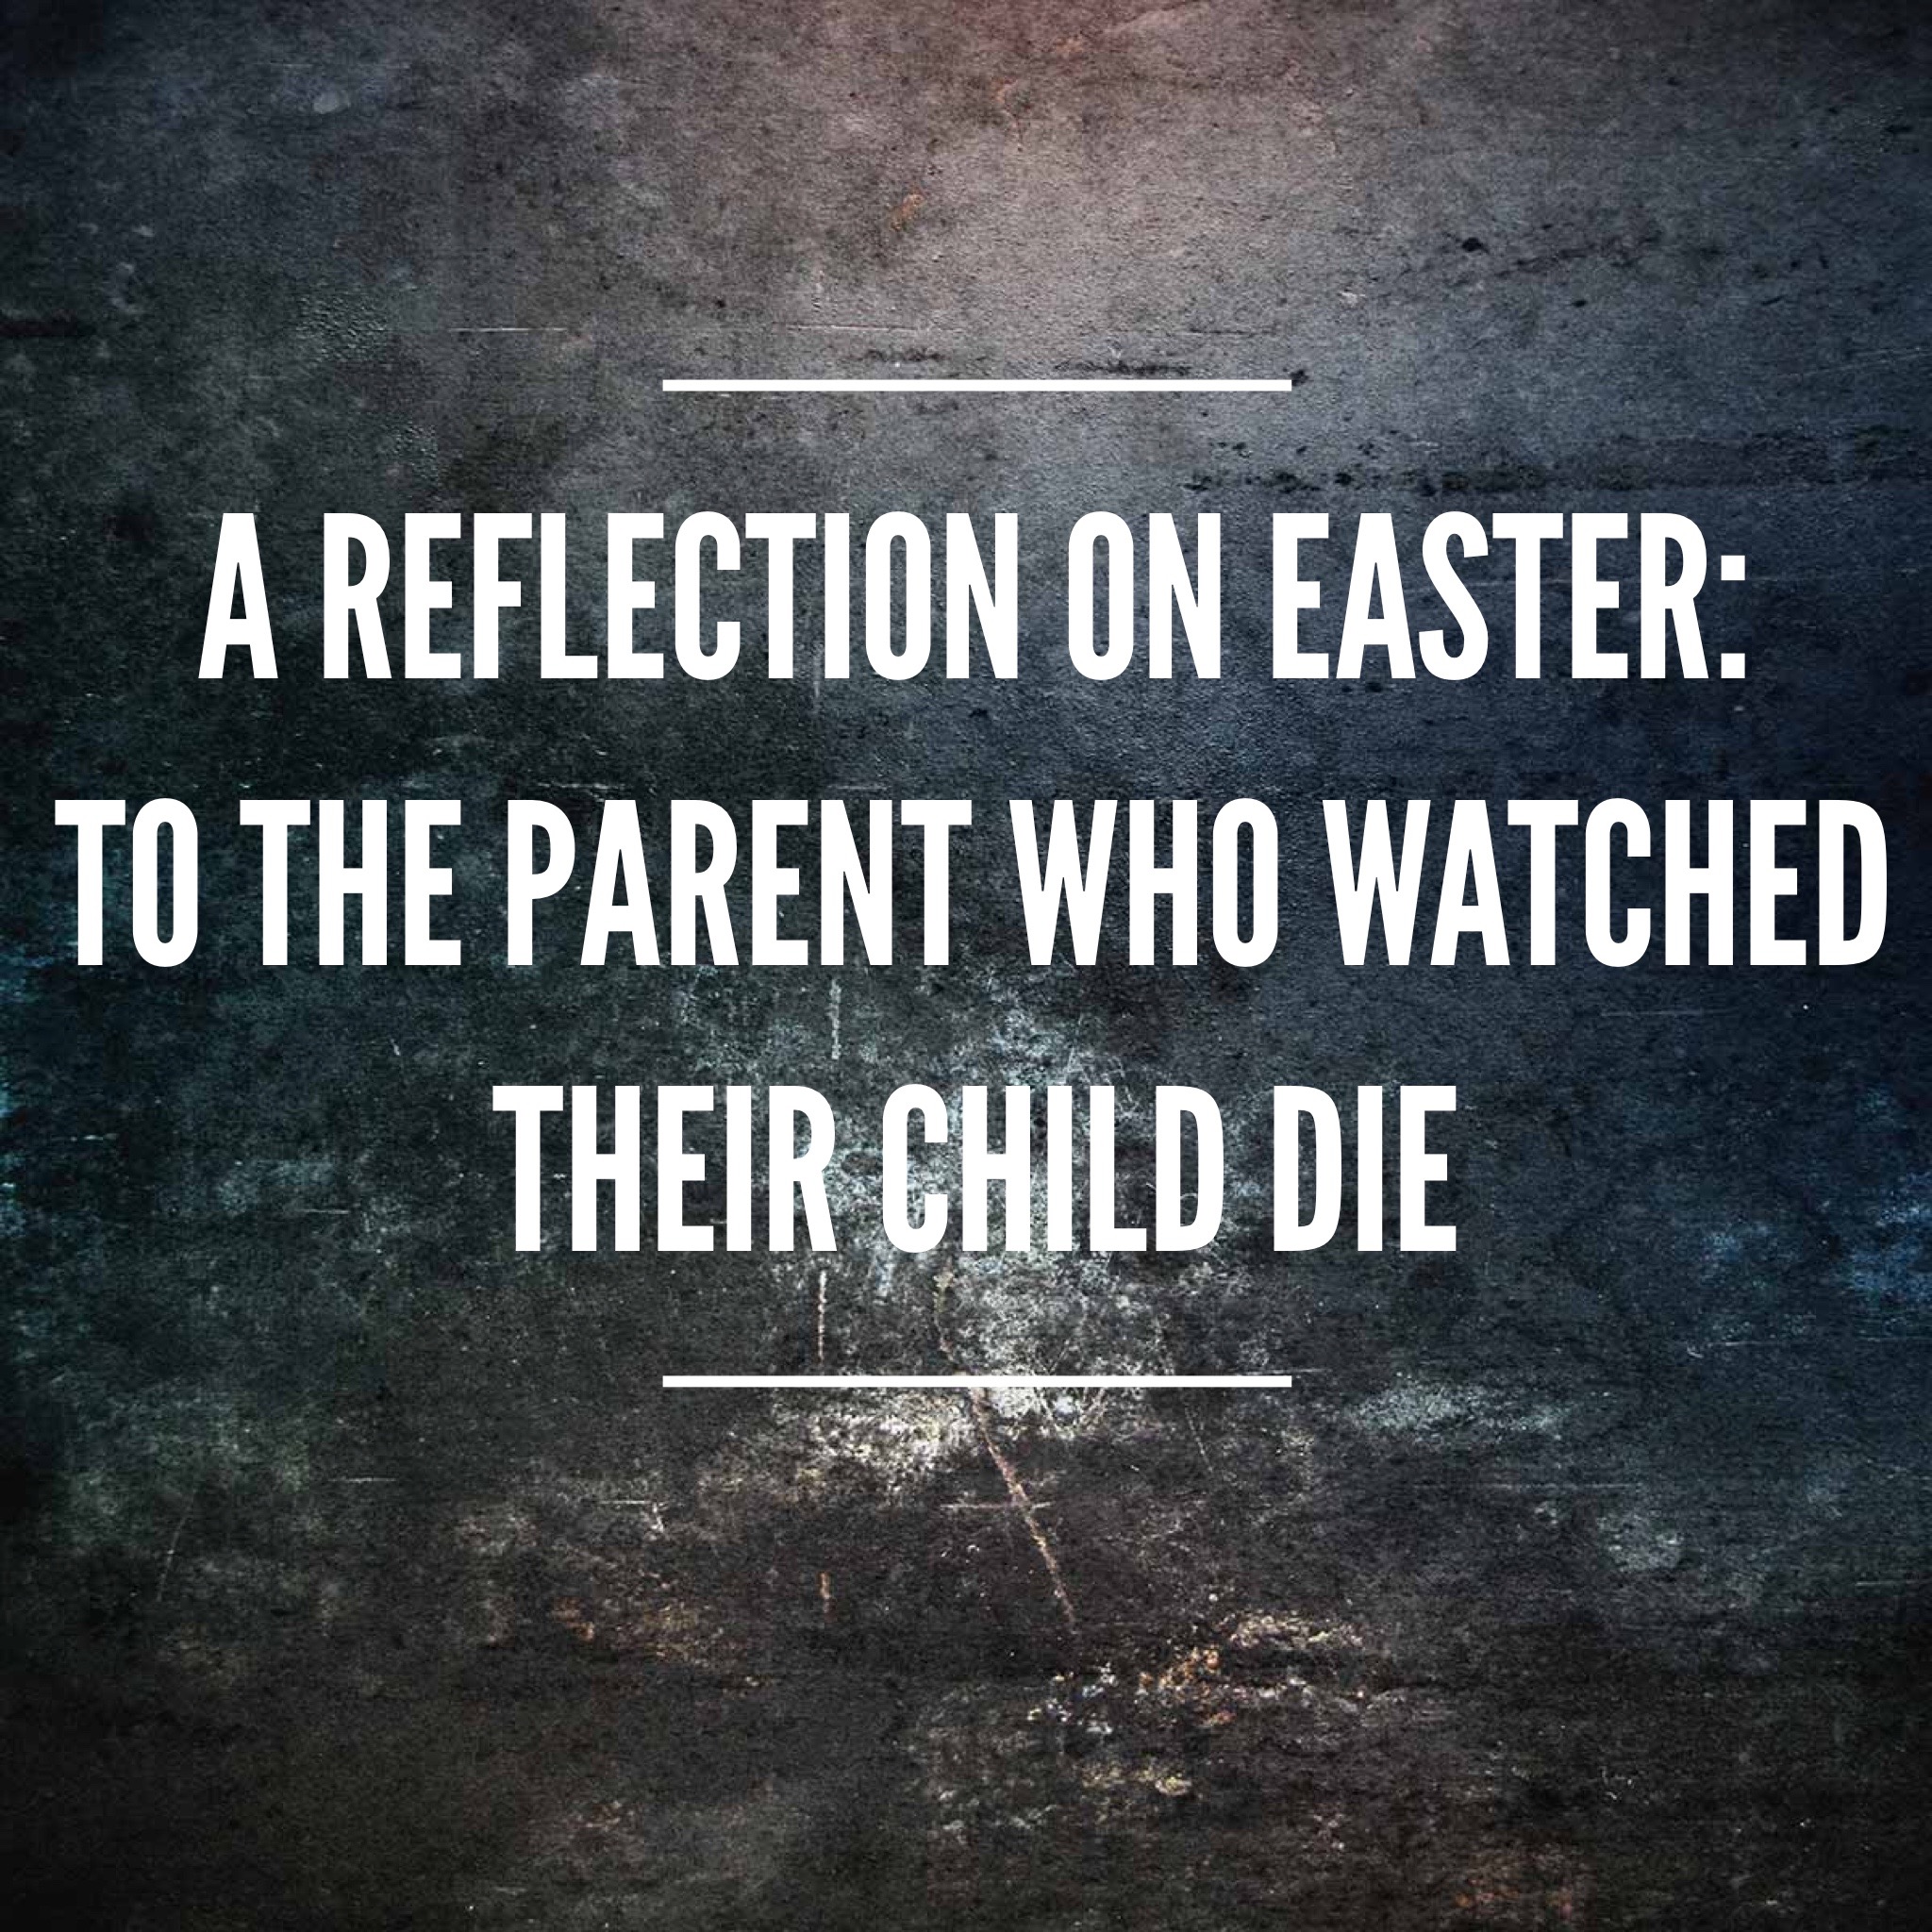 A reflection on Easter: To the parent who watched their child die